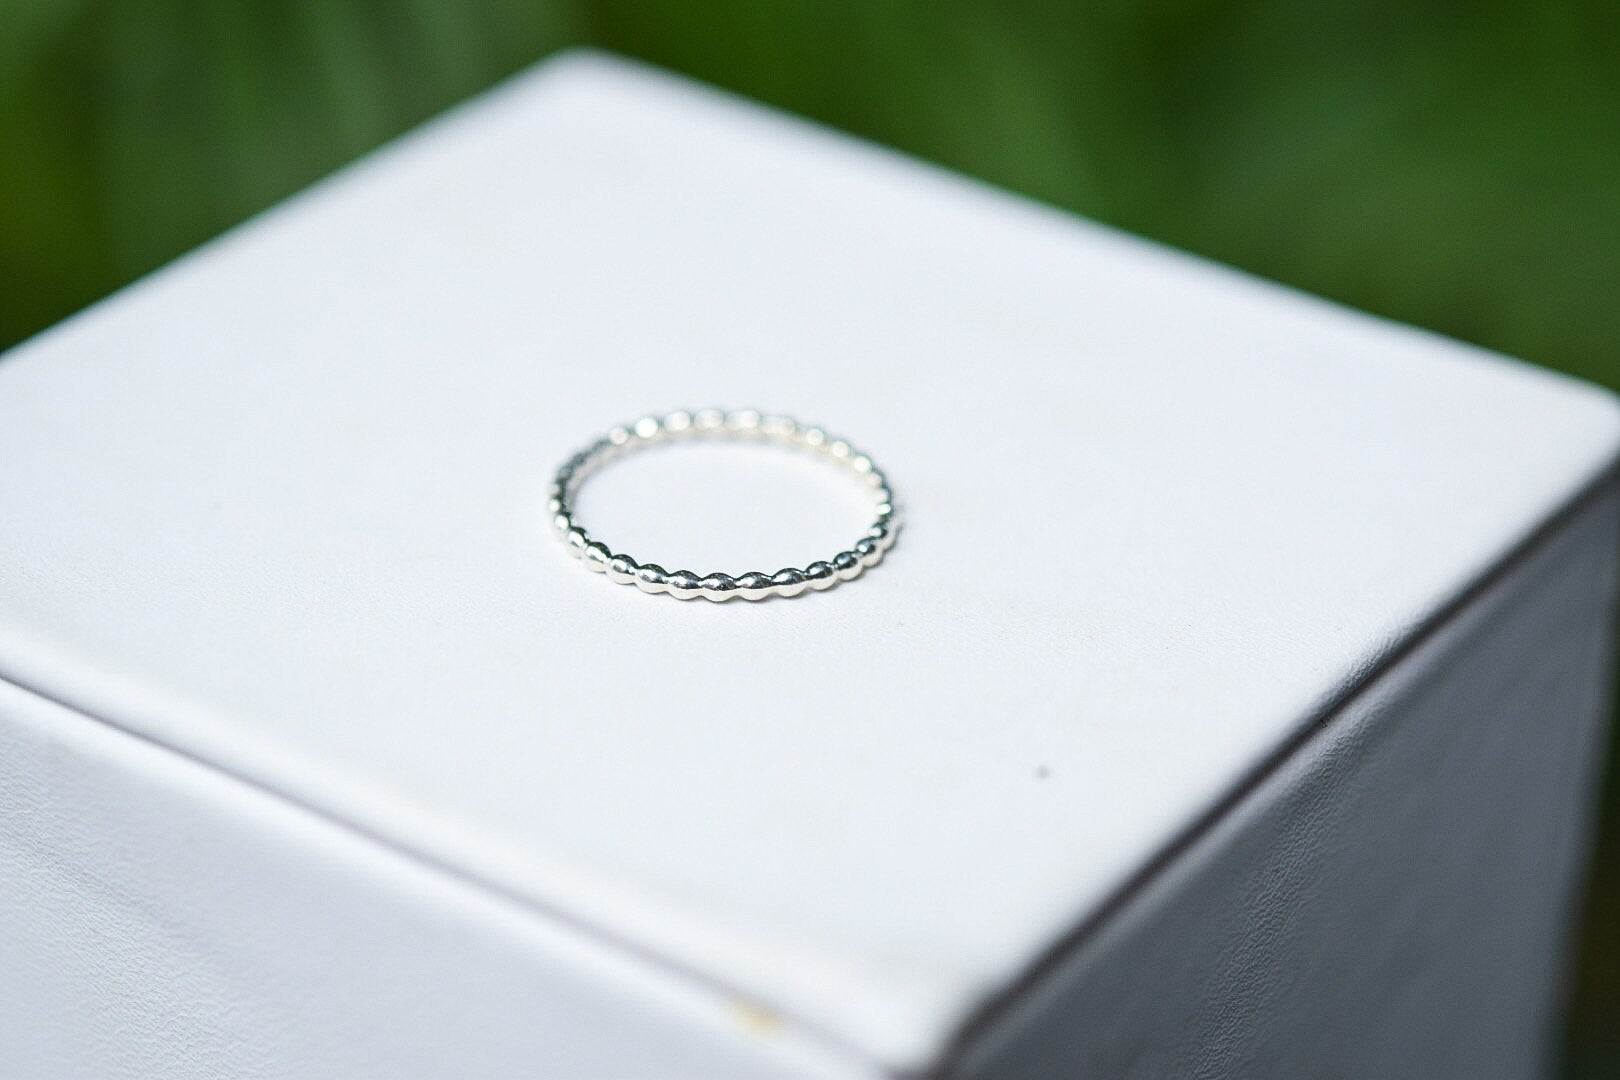 Thin Beaded Stacking Ring/ Sterling Silver/ Dot Ring/ Beaded Ring